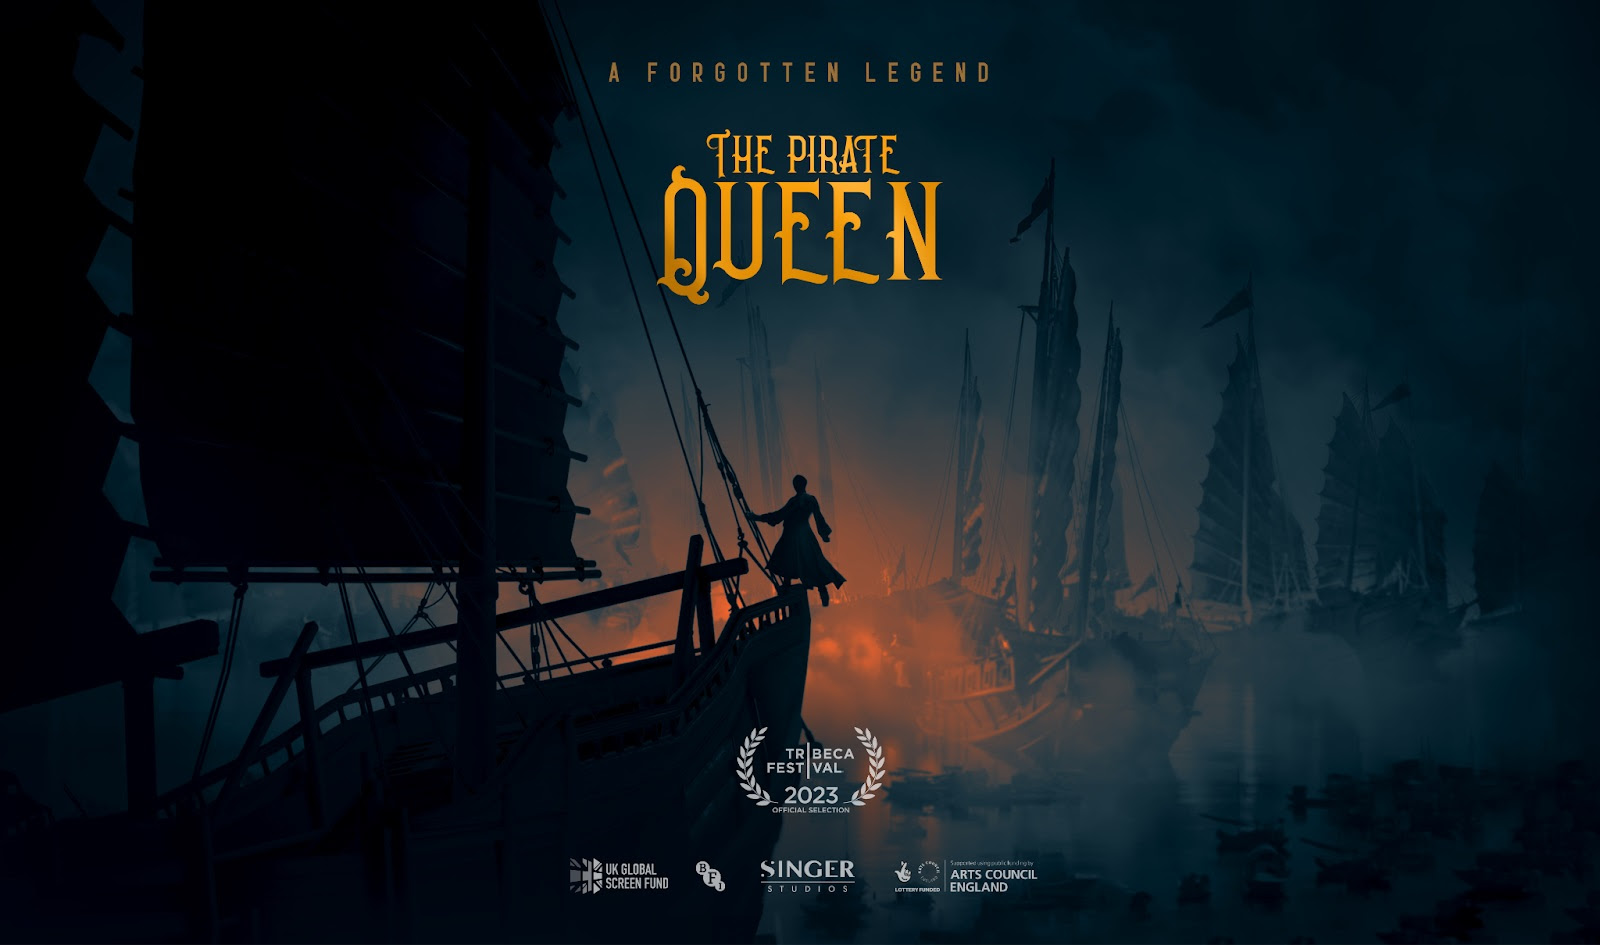 The key art for The Pirate Queen.